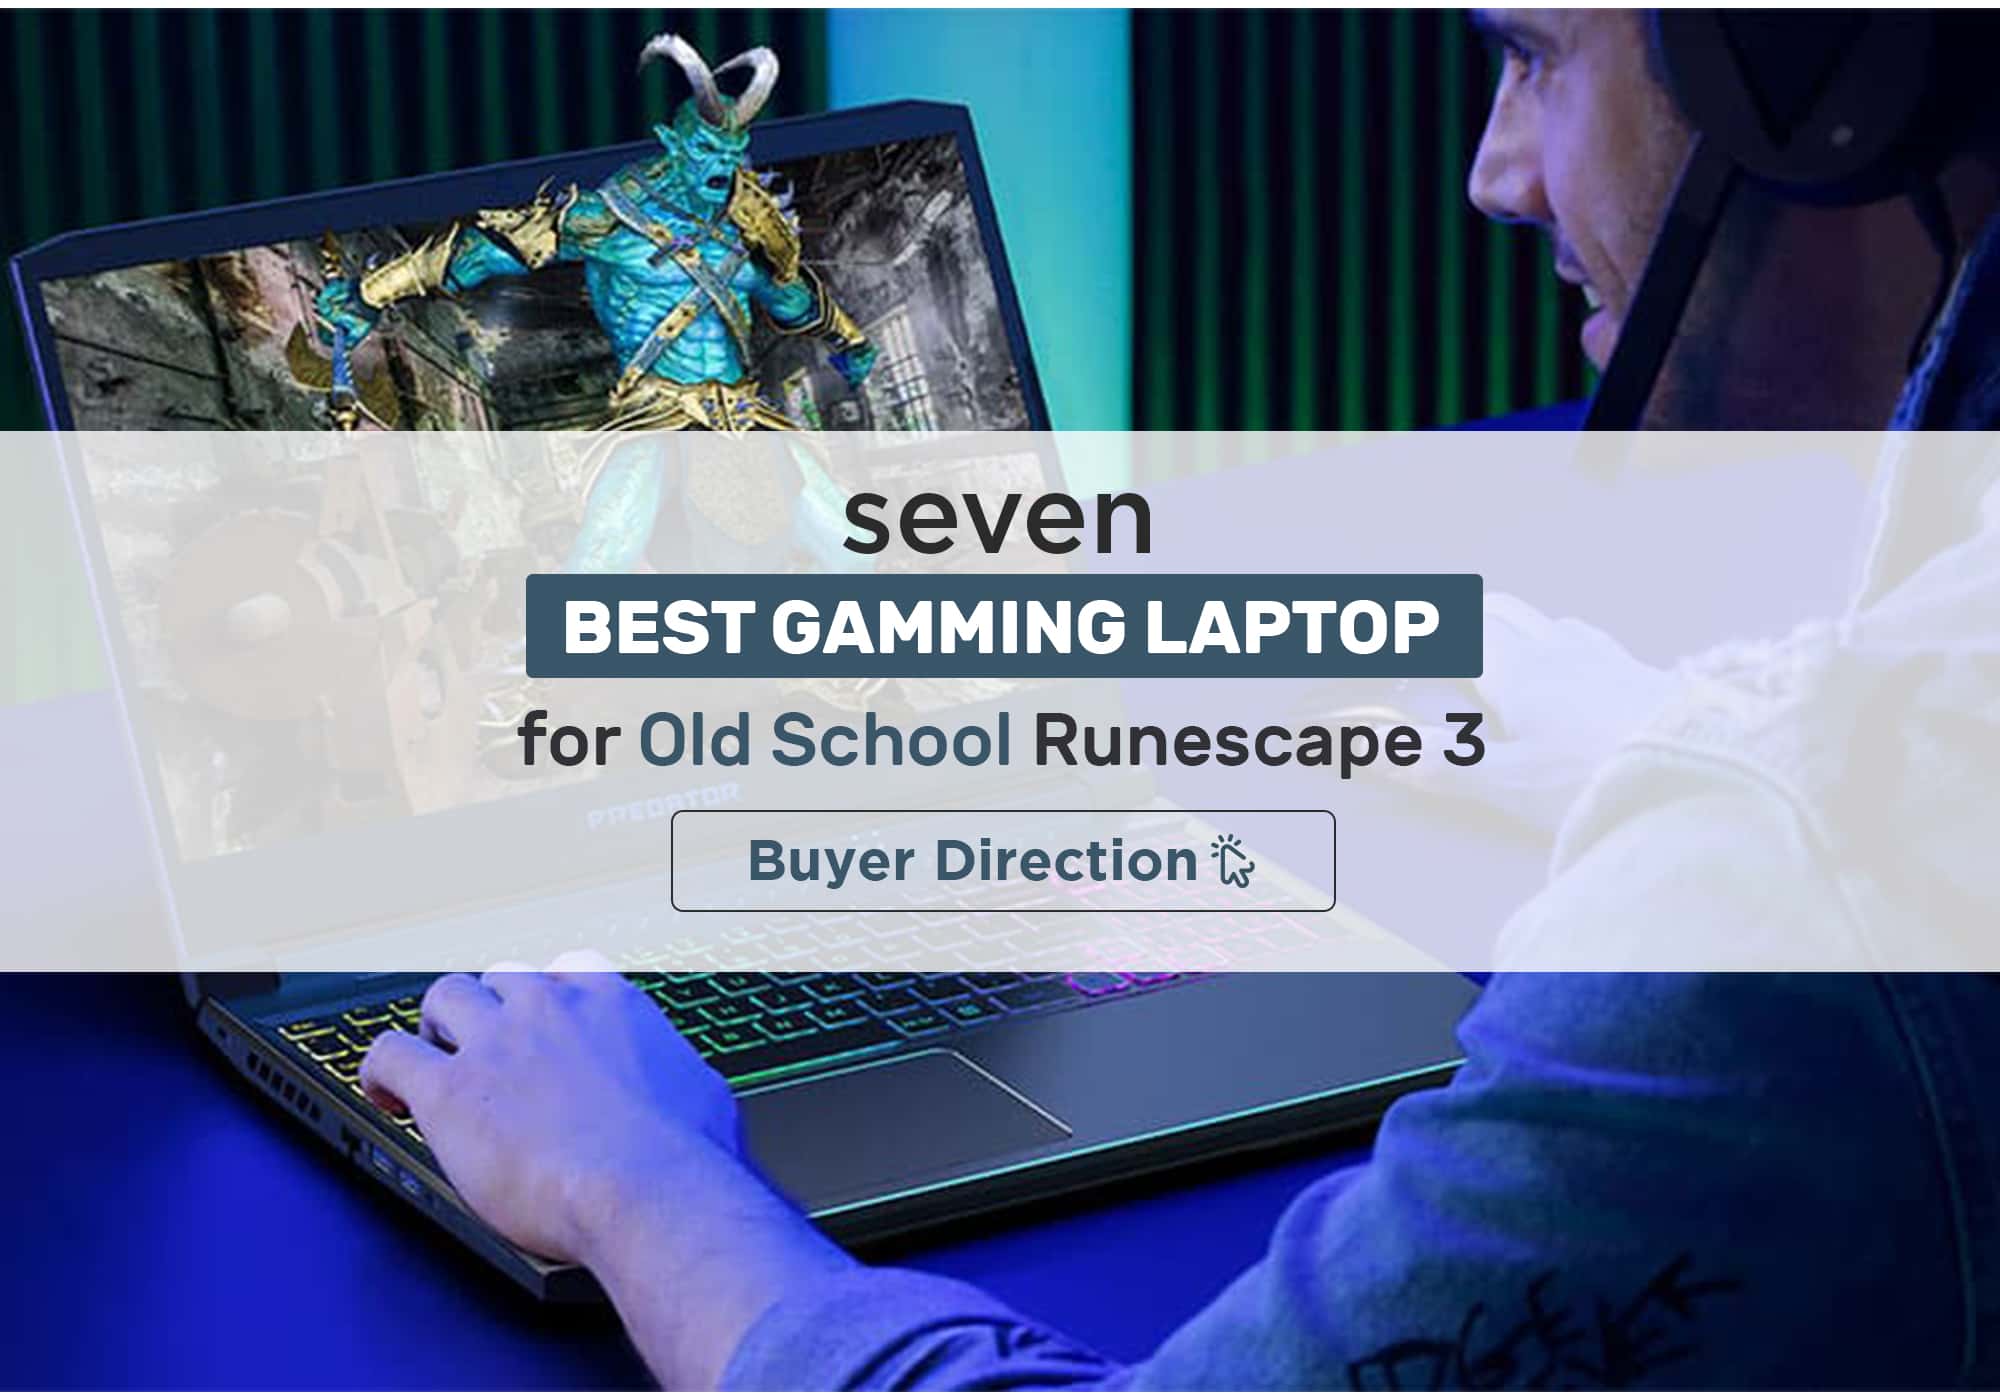 7 Best Gaming Laptops for Old School Runescape 3